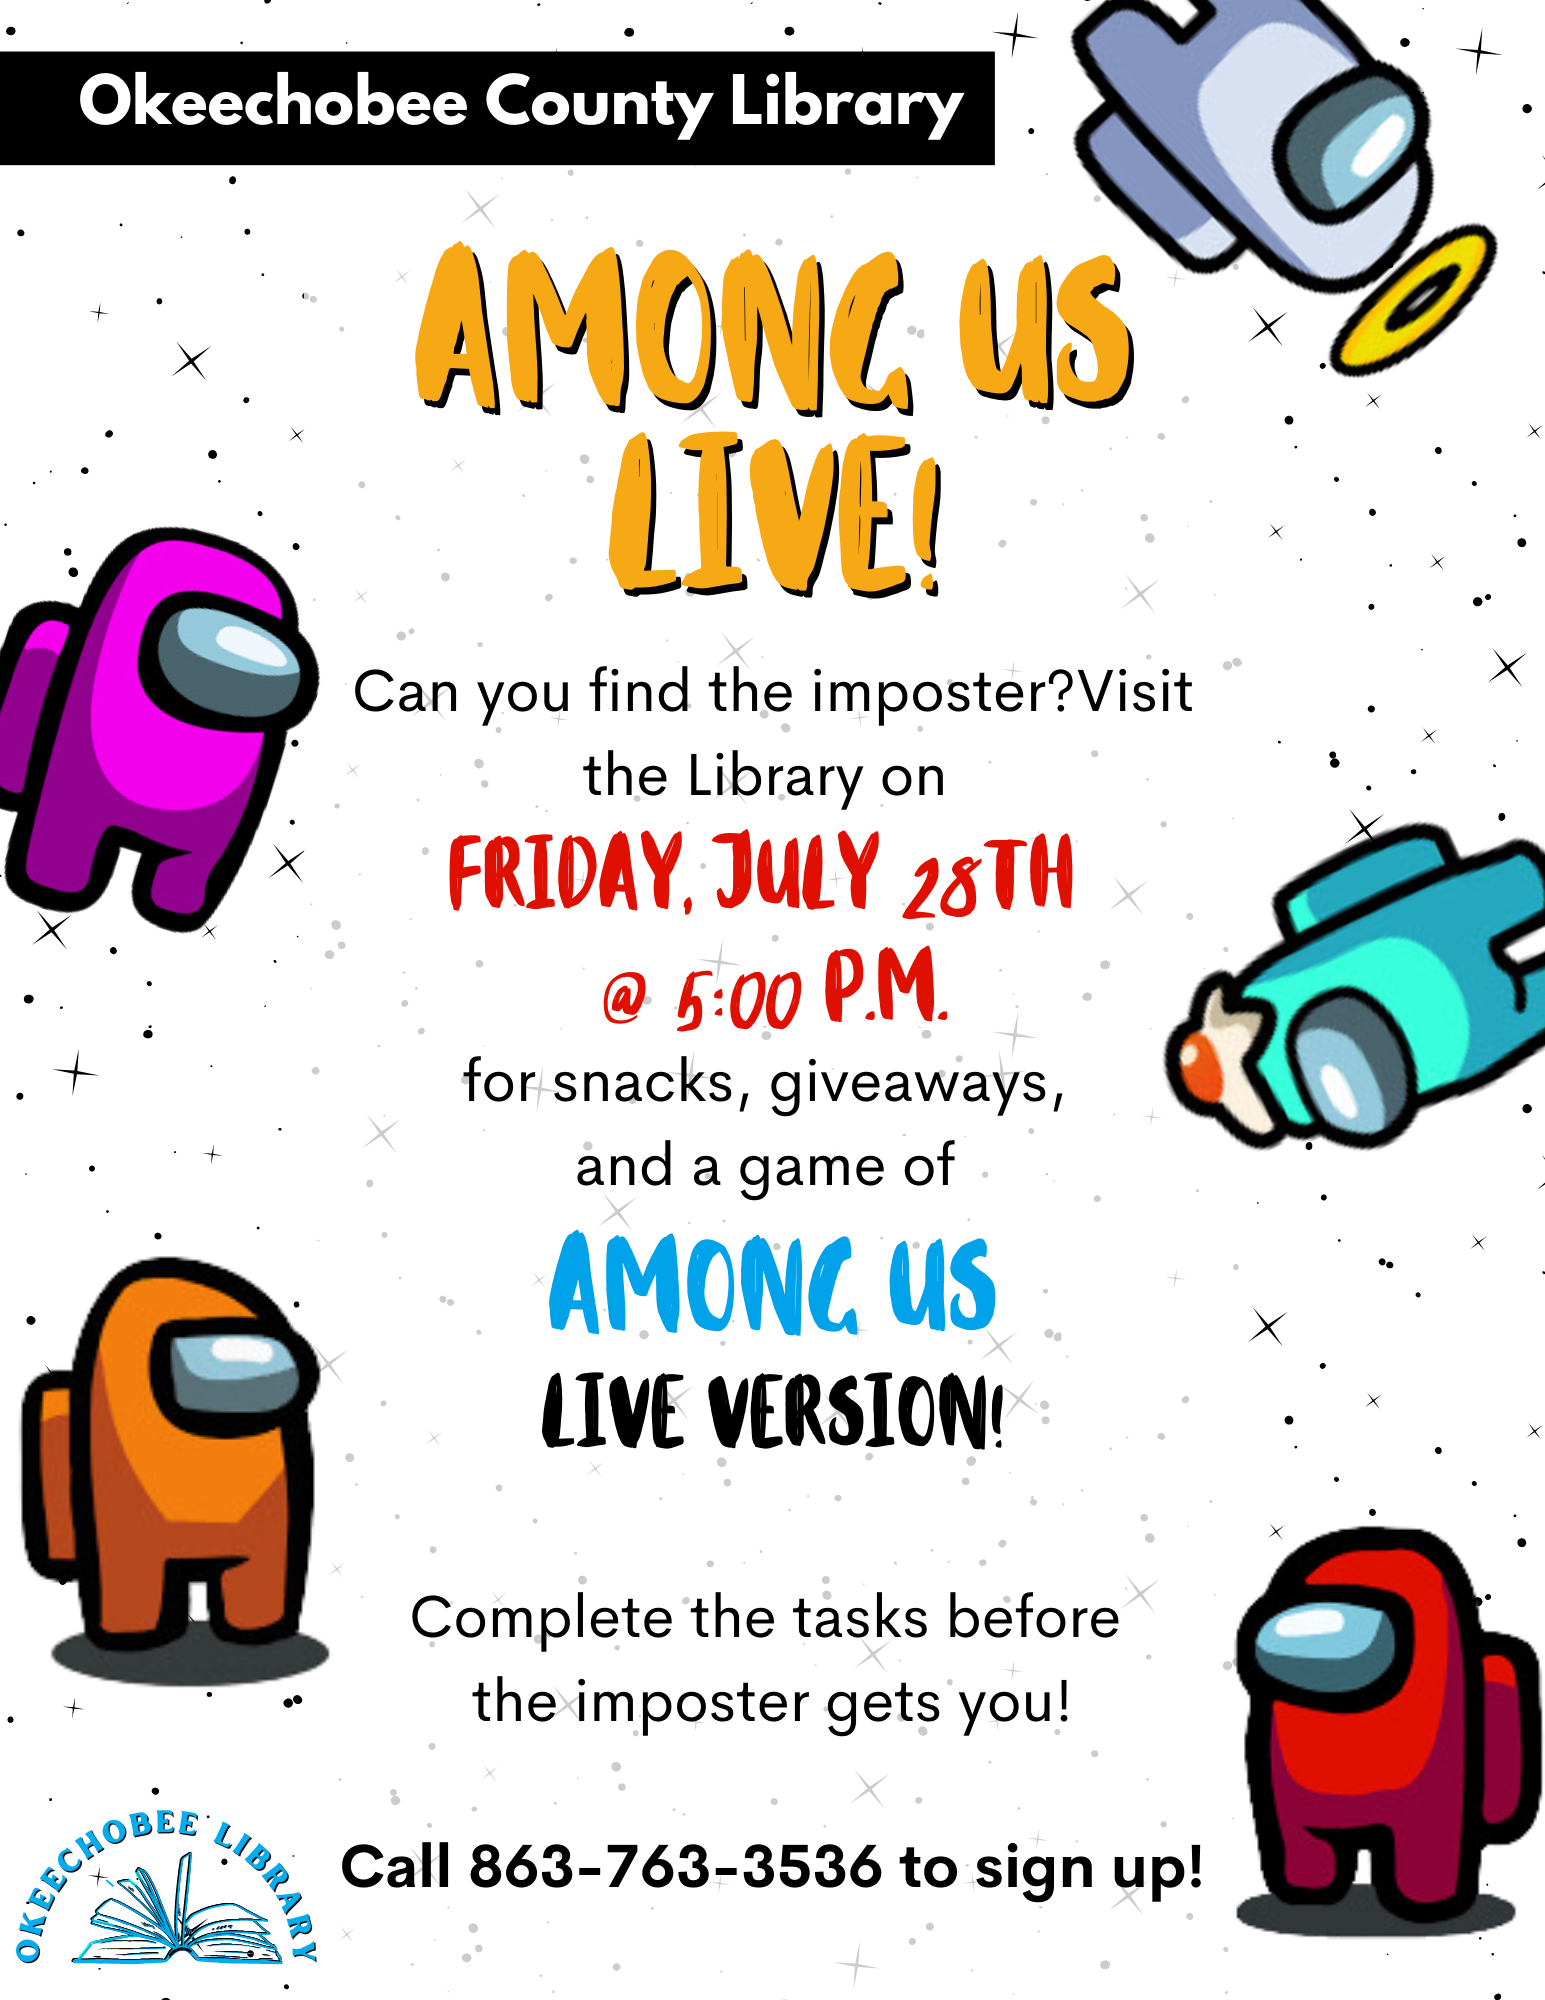 Among Us LIVE is coming to the Okeechobee Library Friday, July 28th @ 5:00 p.m. Complete the tasks before the imposter gets you. Call 863-763-3536 to sign up!